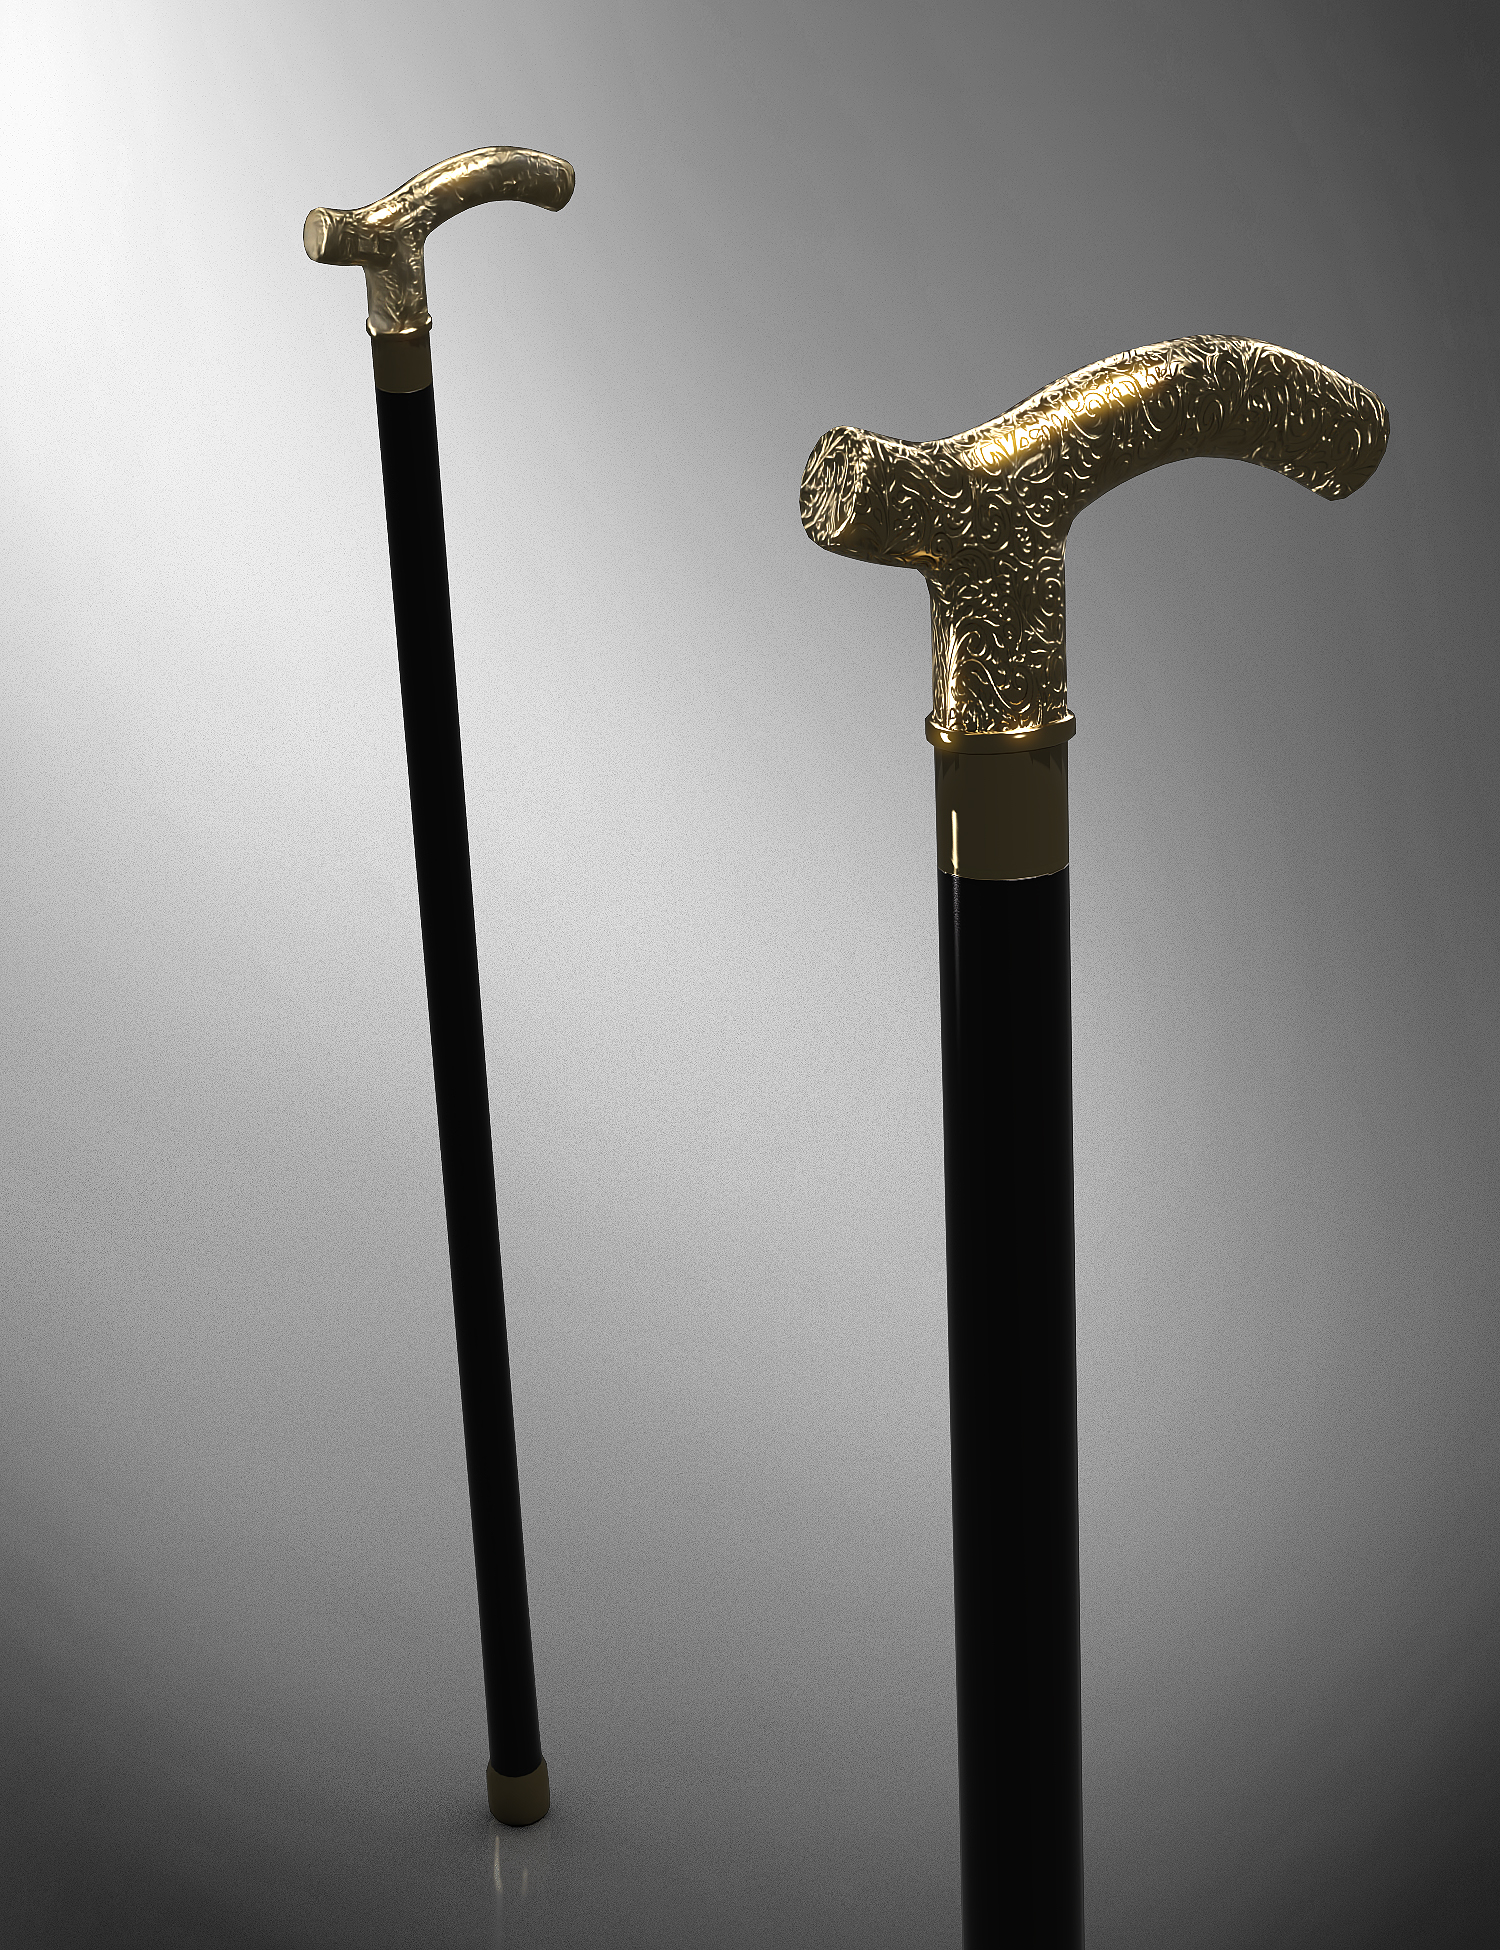 Victorian Vampire Cane for Genesis 8 and 8.1 Females